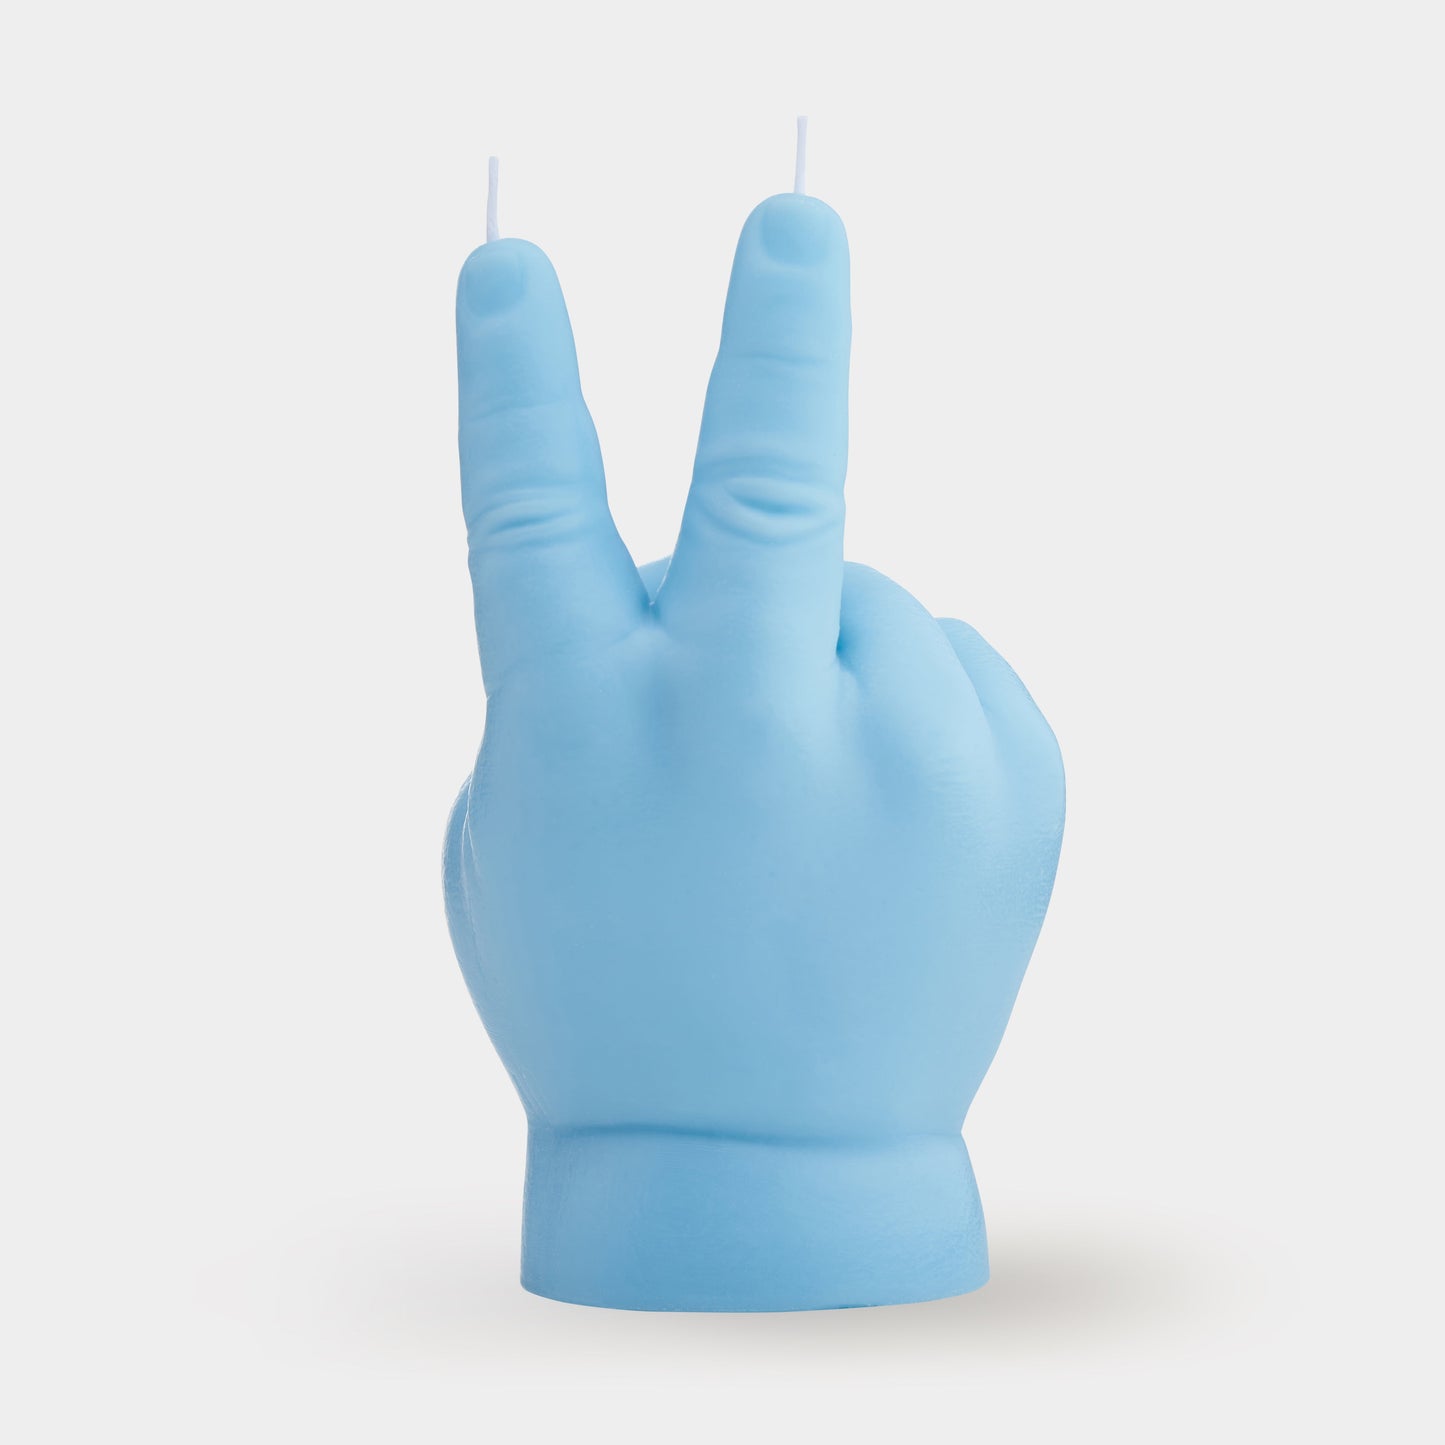 Baby Peace Candle by CandleHand